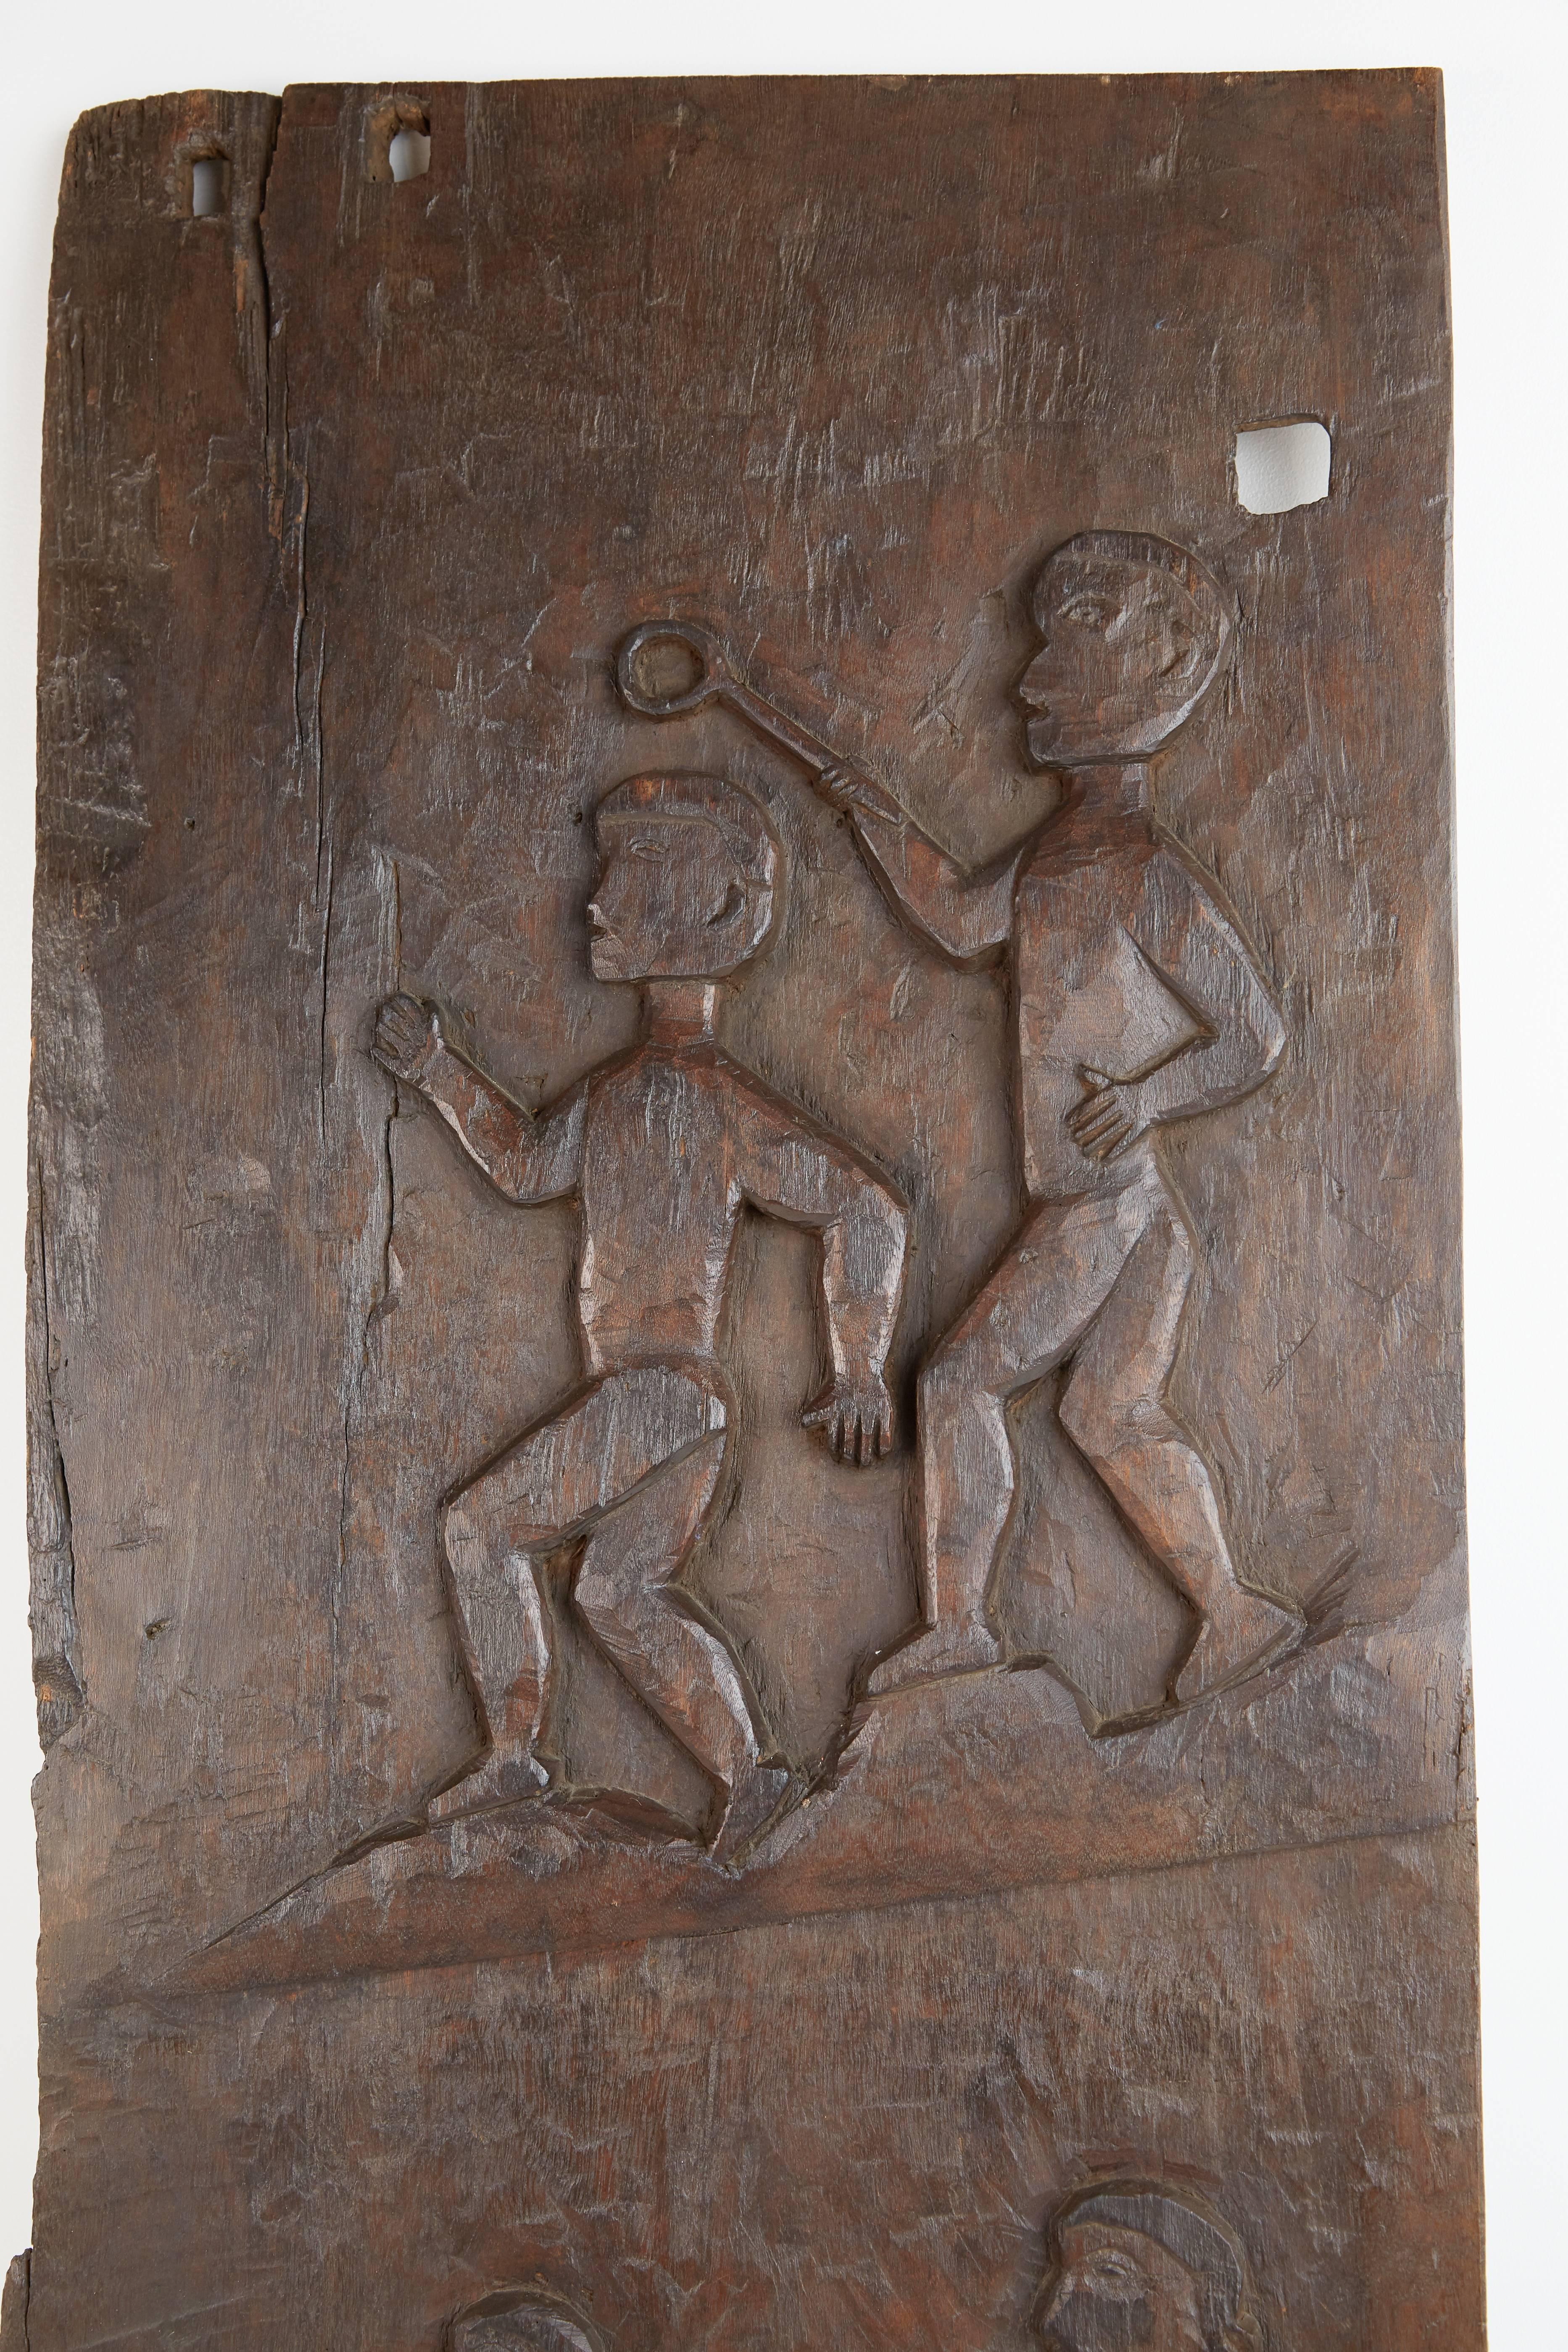 Decorative African carved large granary door featuring figures holding various tools carved in the traditional manner by tribal artisans. At one end the door can be mounted using two holes and it also has a wire affixed to the back for hanging on